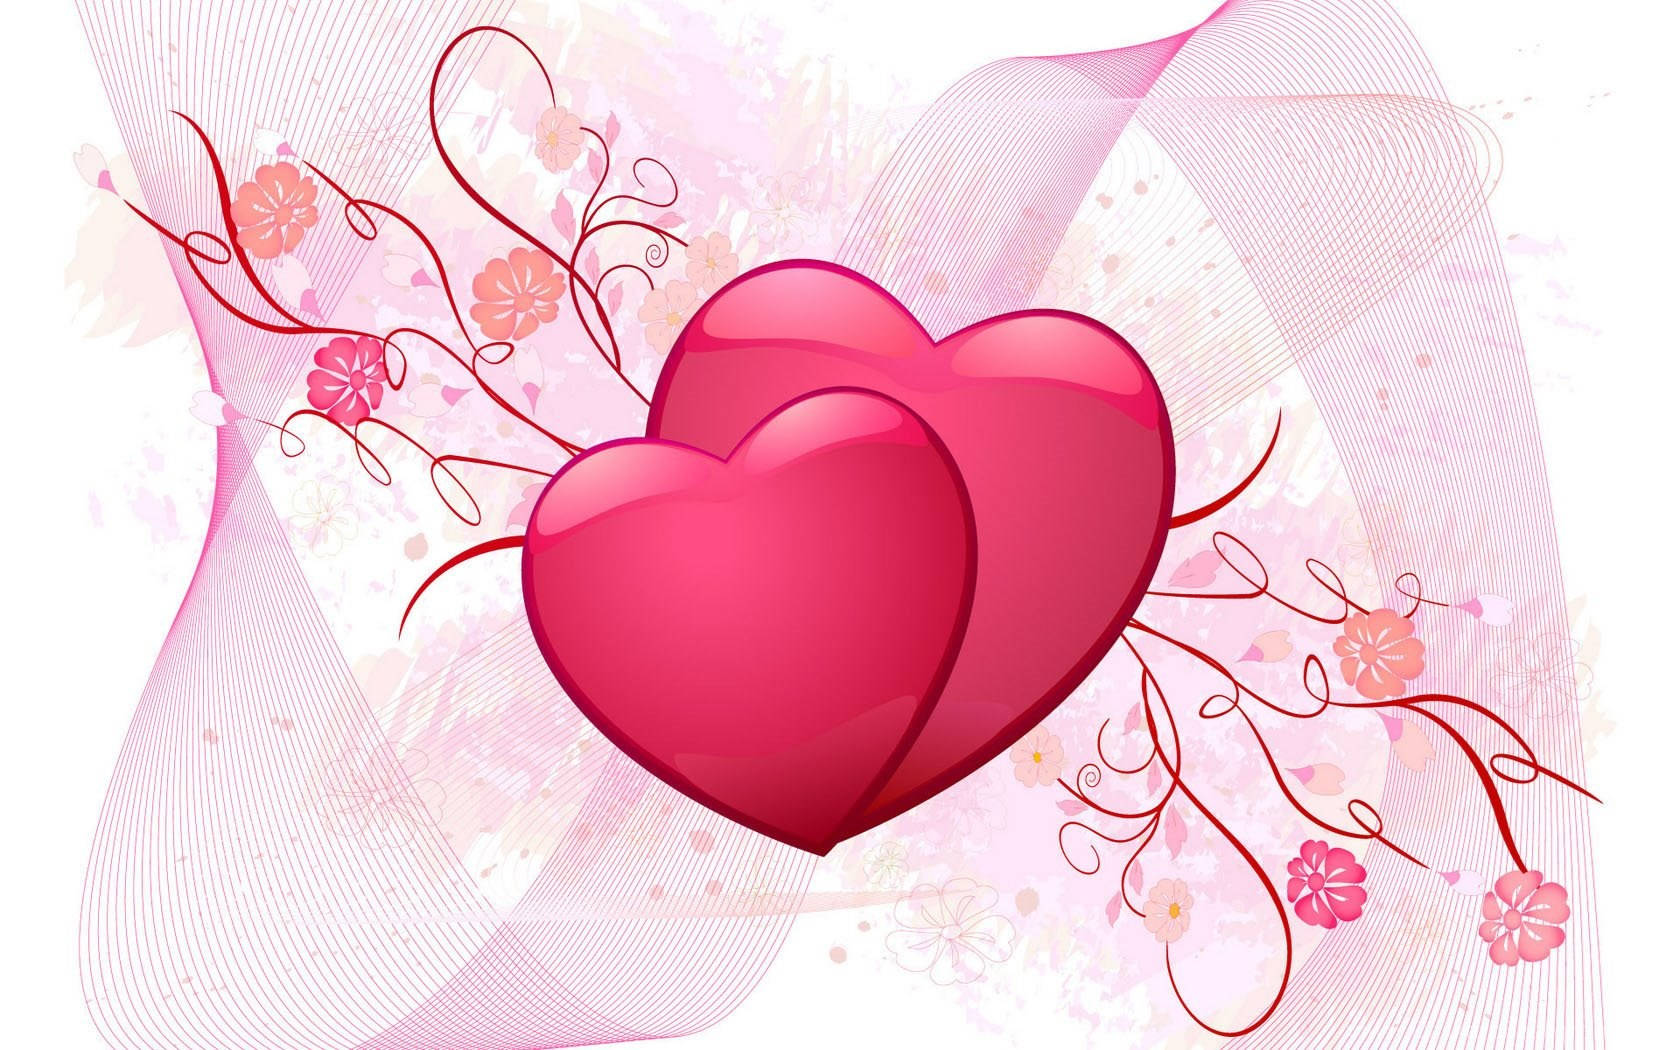 Pink Hearts Of Love For Valentine's Day Background